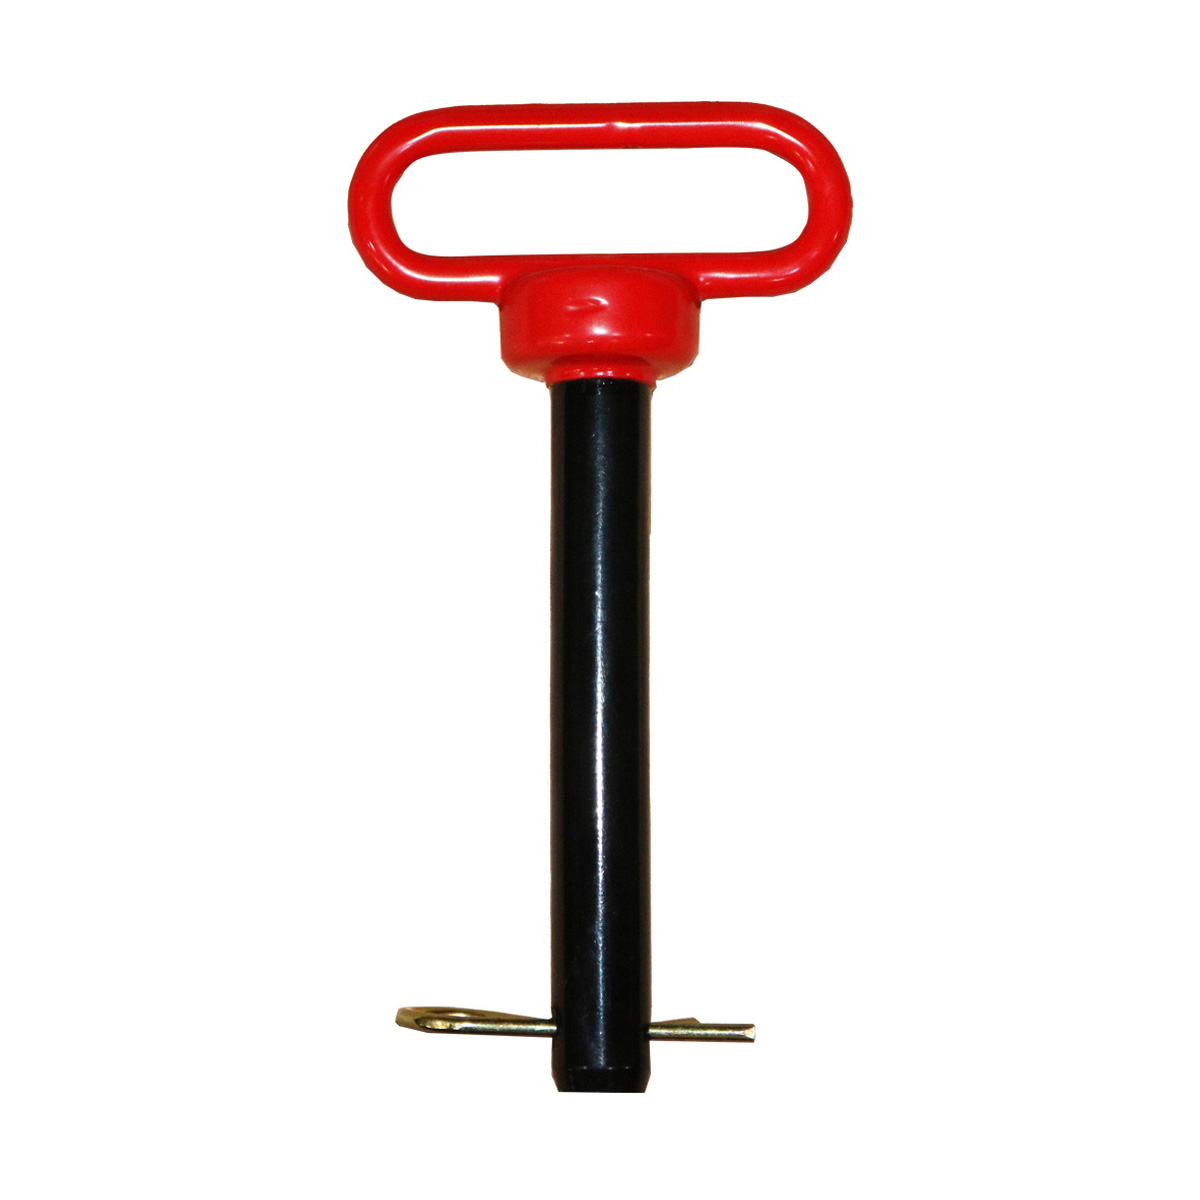 Red Head Hitch Pin - 7/8-in x 4-1/4-in